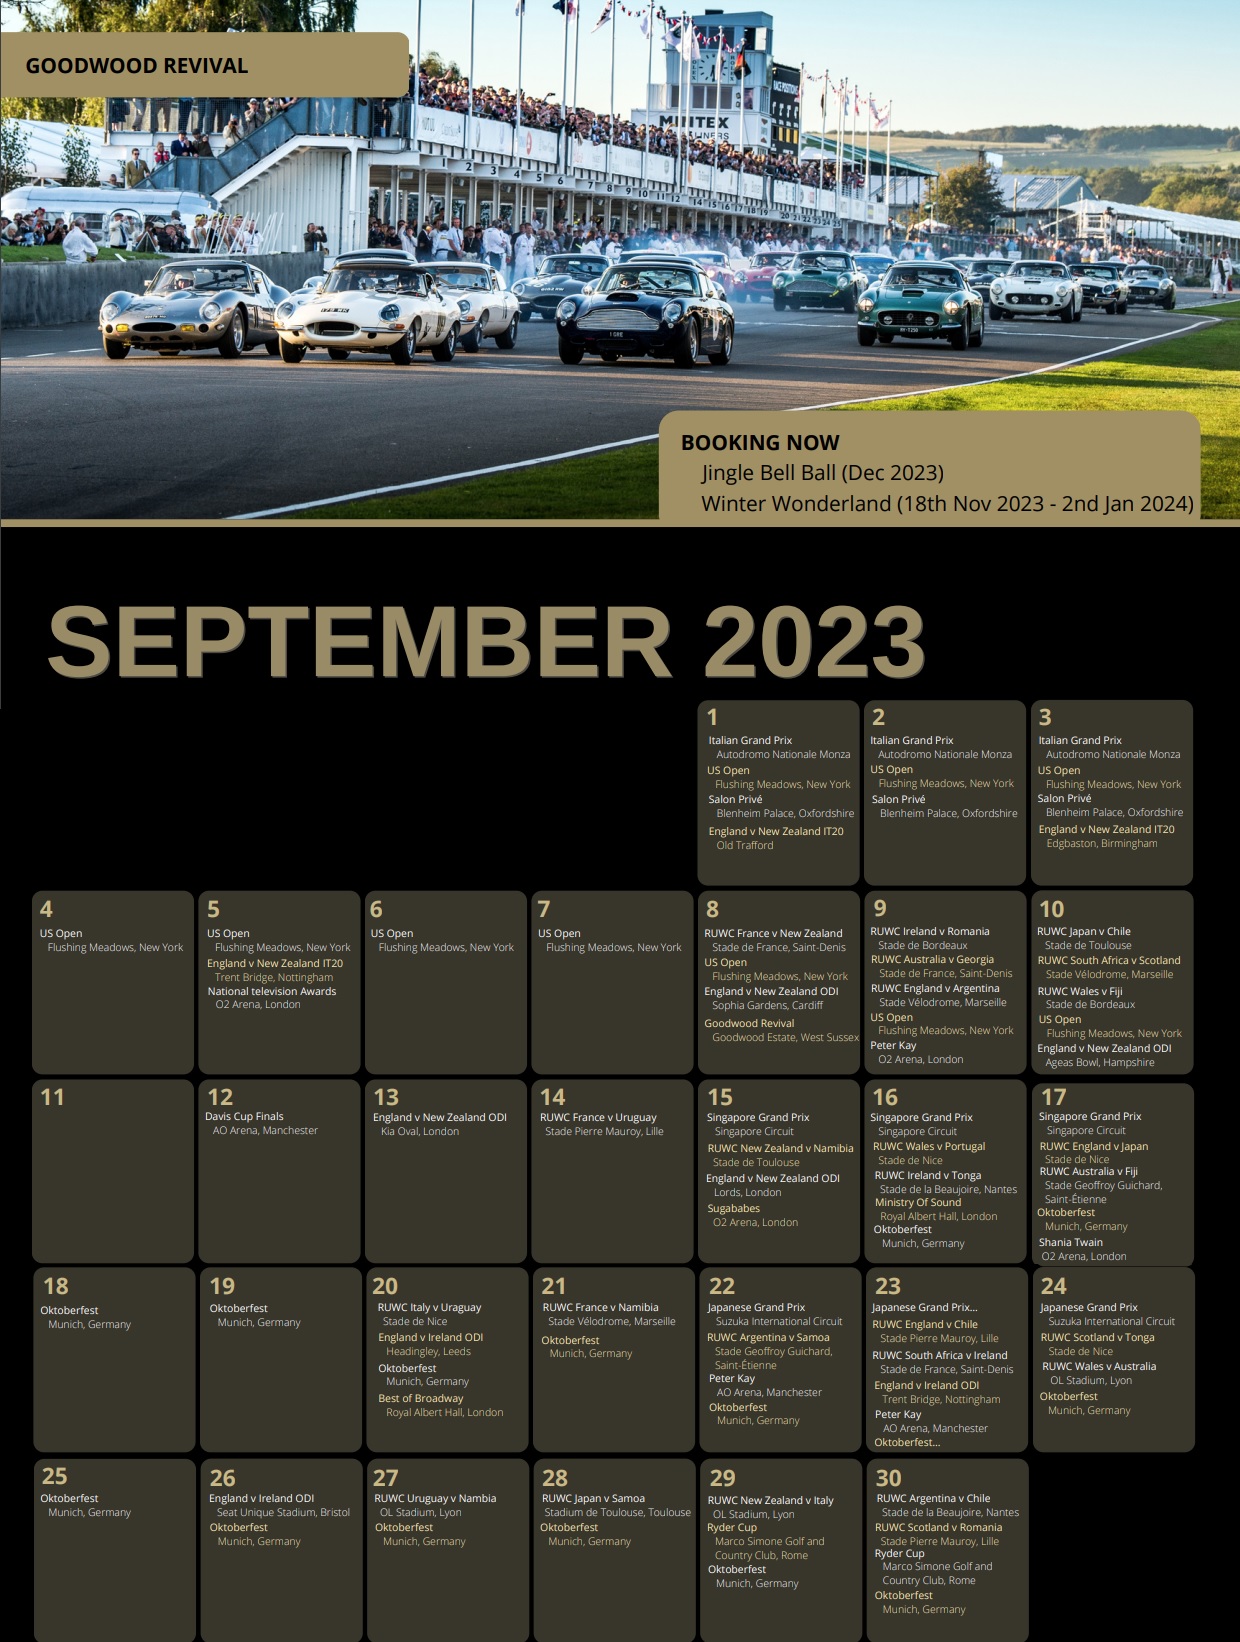 hottest events happening in septmber 2023 in london